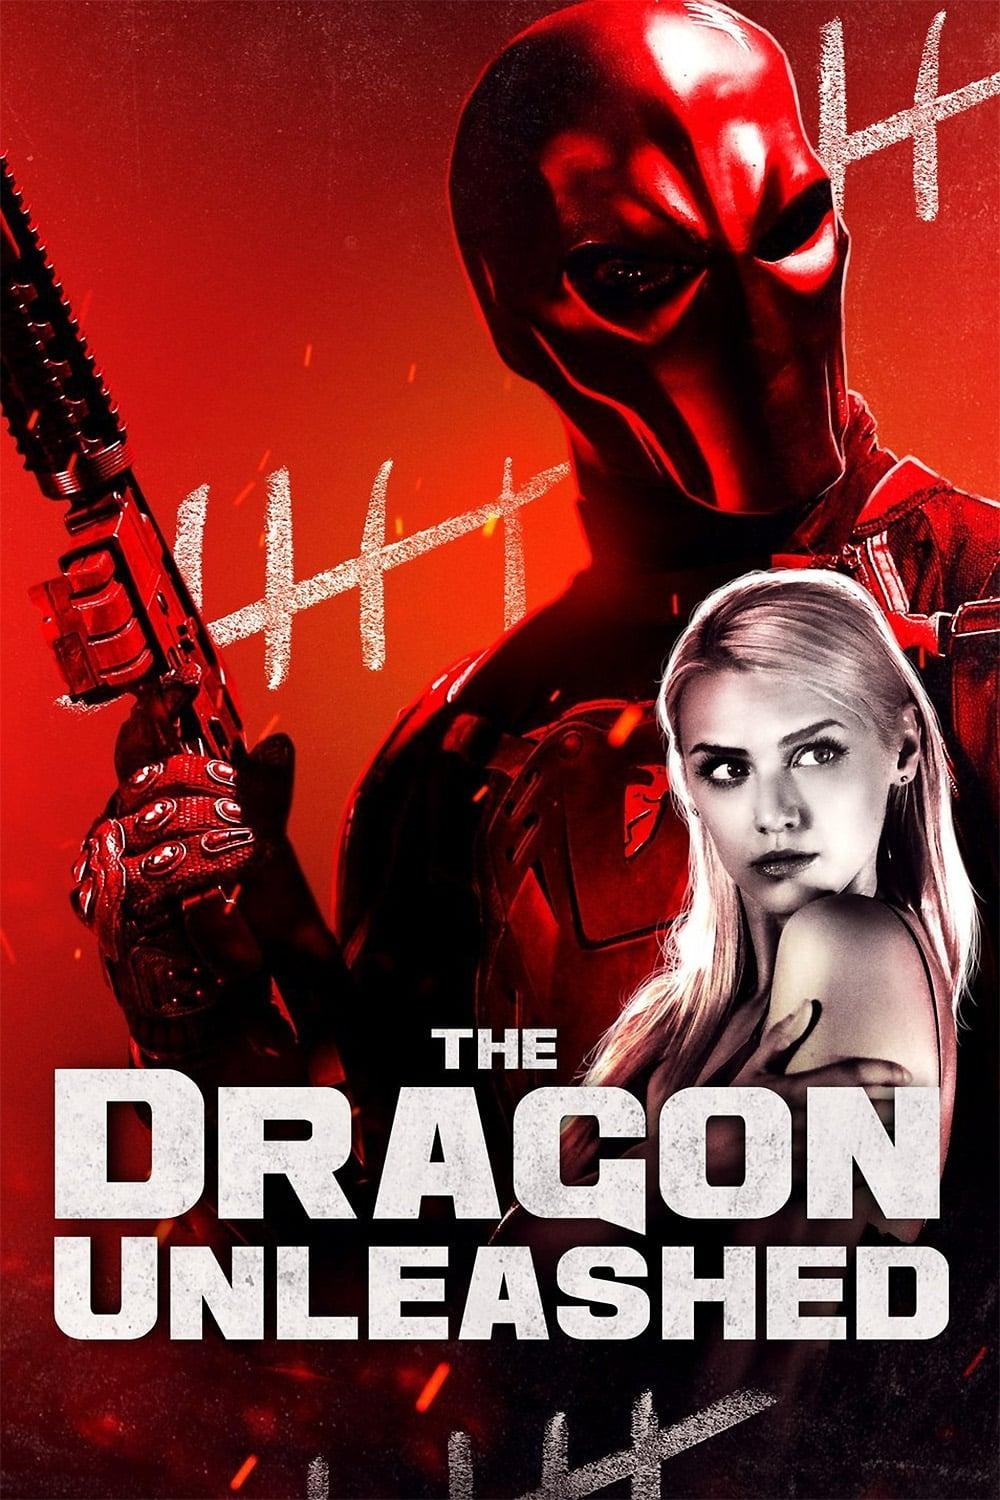 The Dragon Unleashed poster